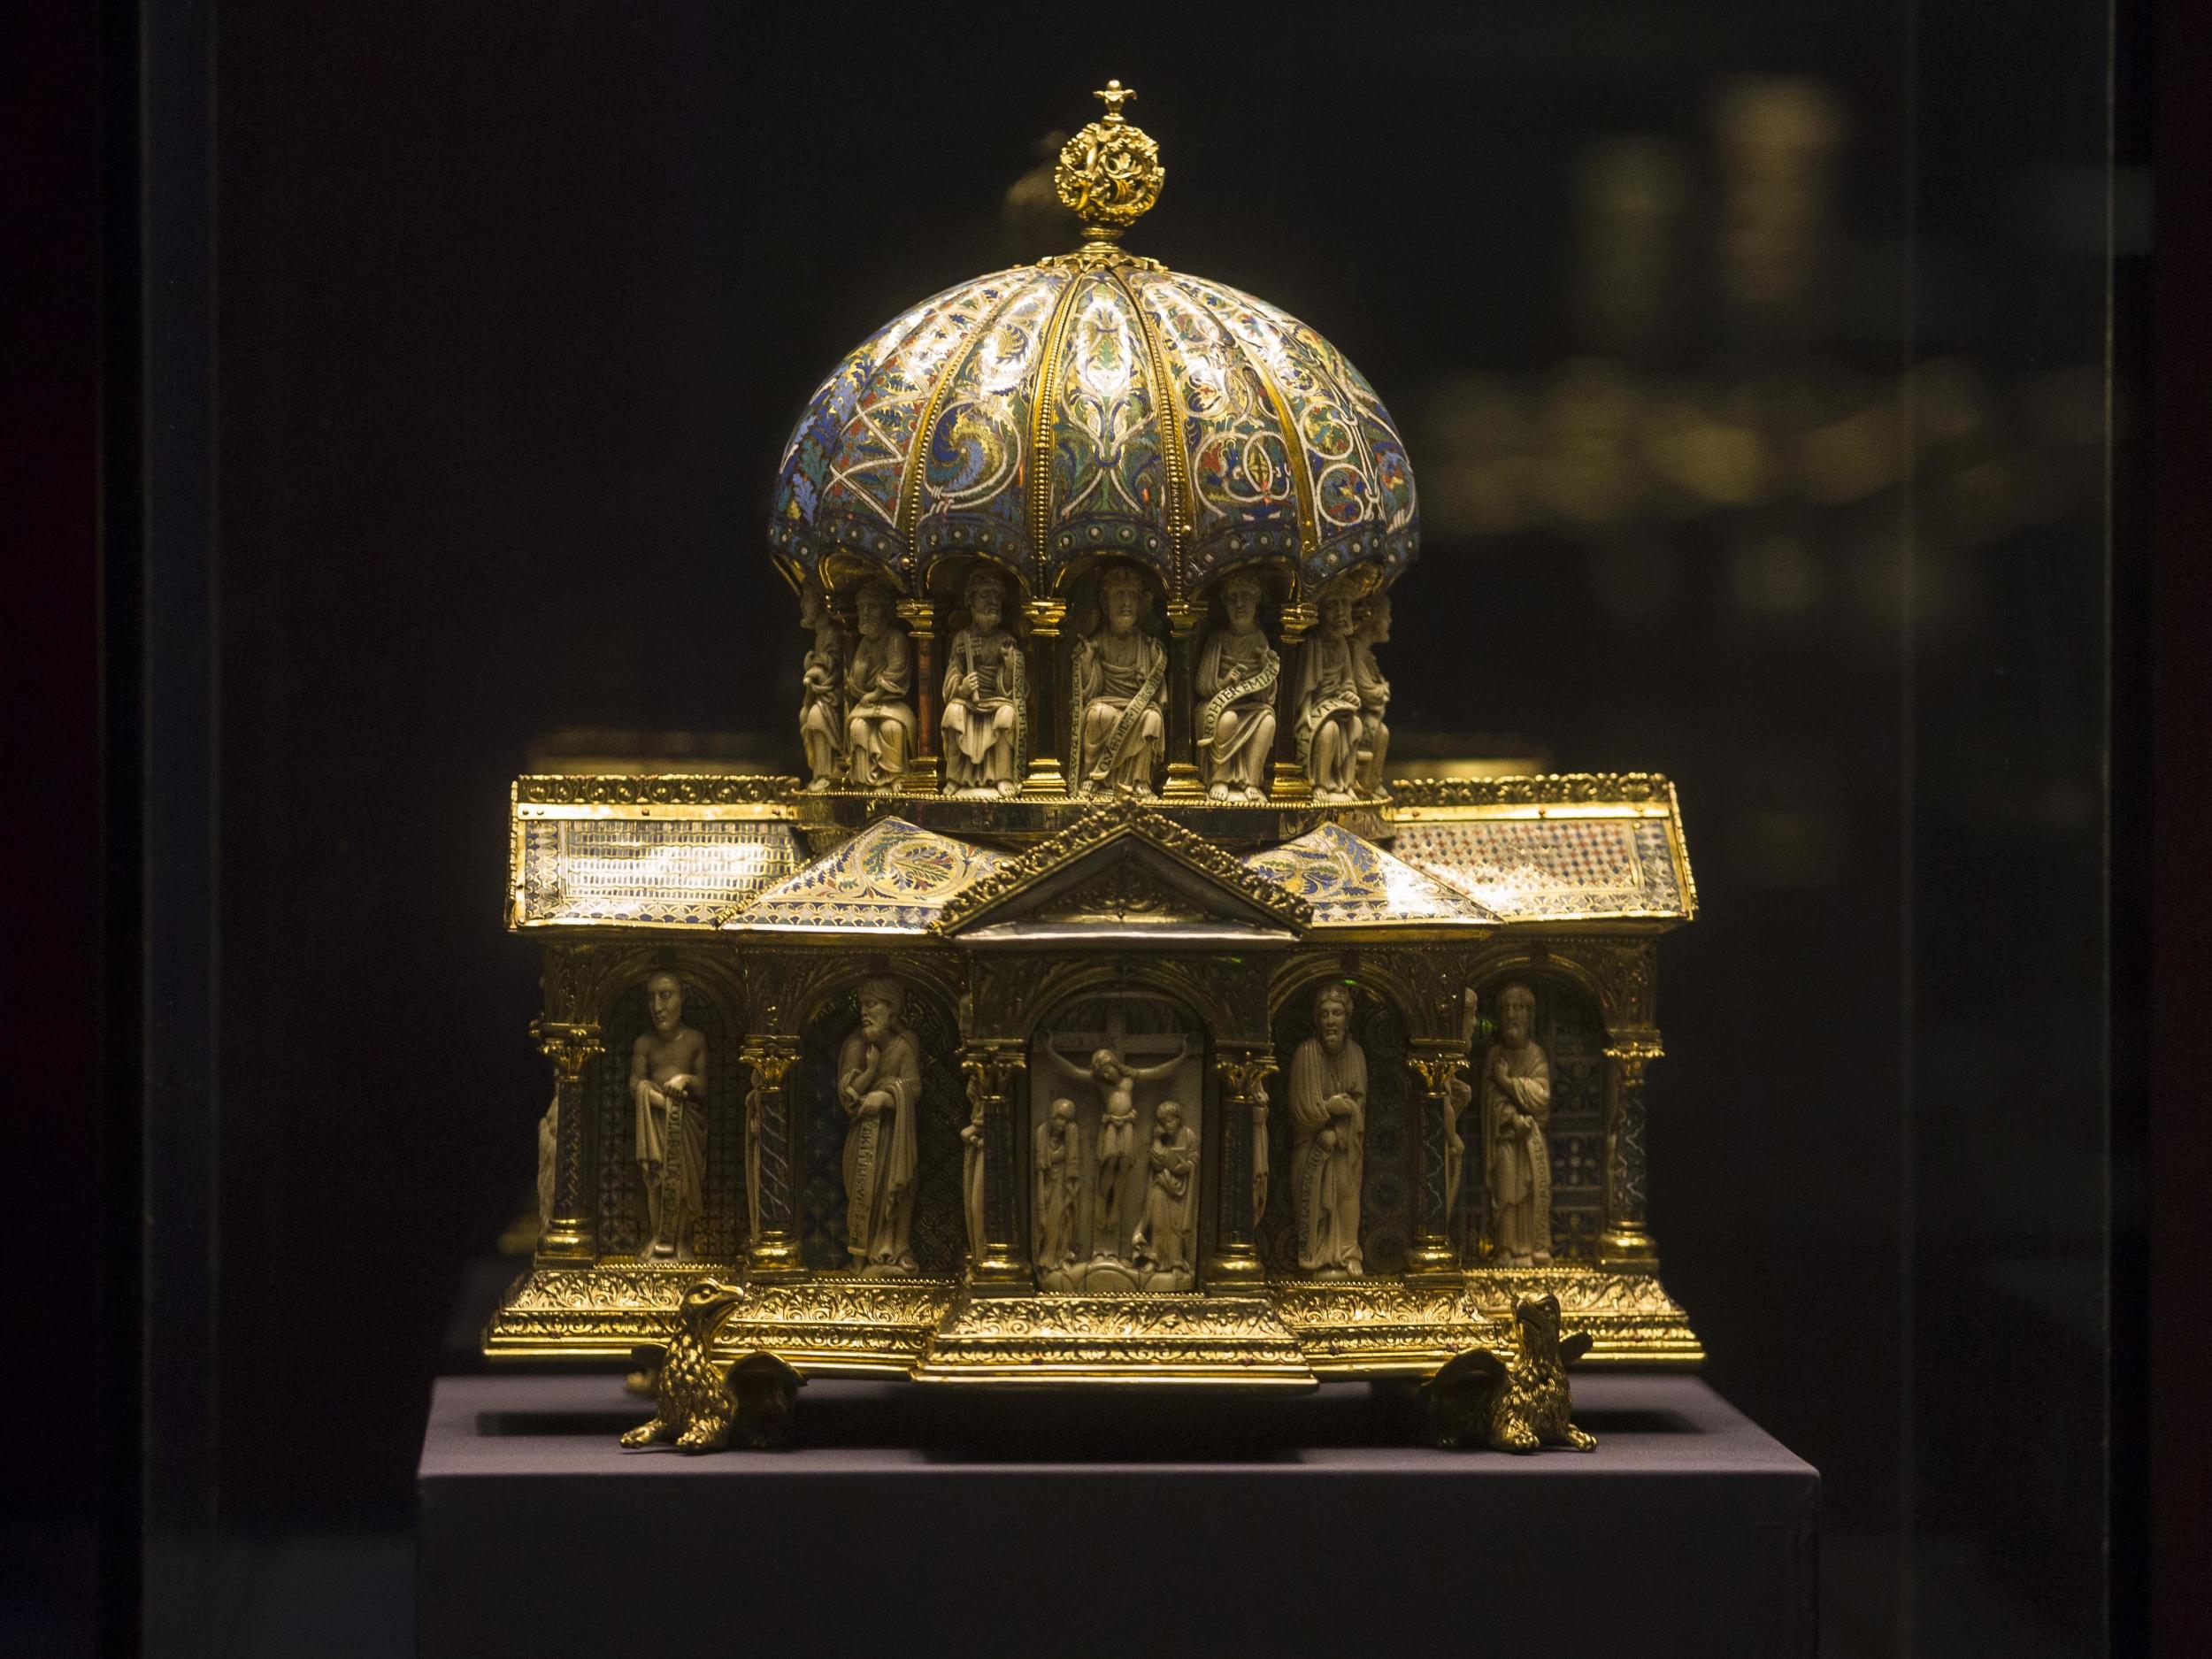 The 13th century medieval Dome Reliquary of the Welfenschatz displayed at the Bode Museum in Berlin